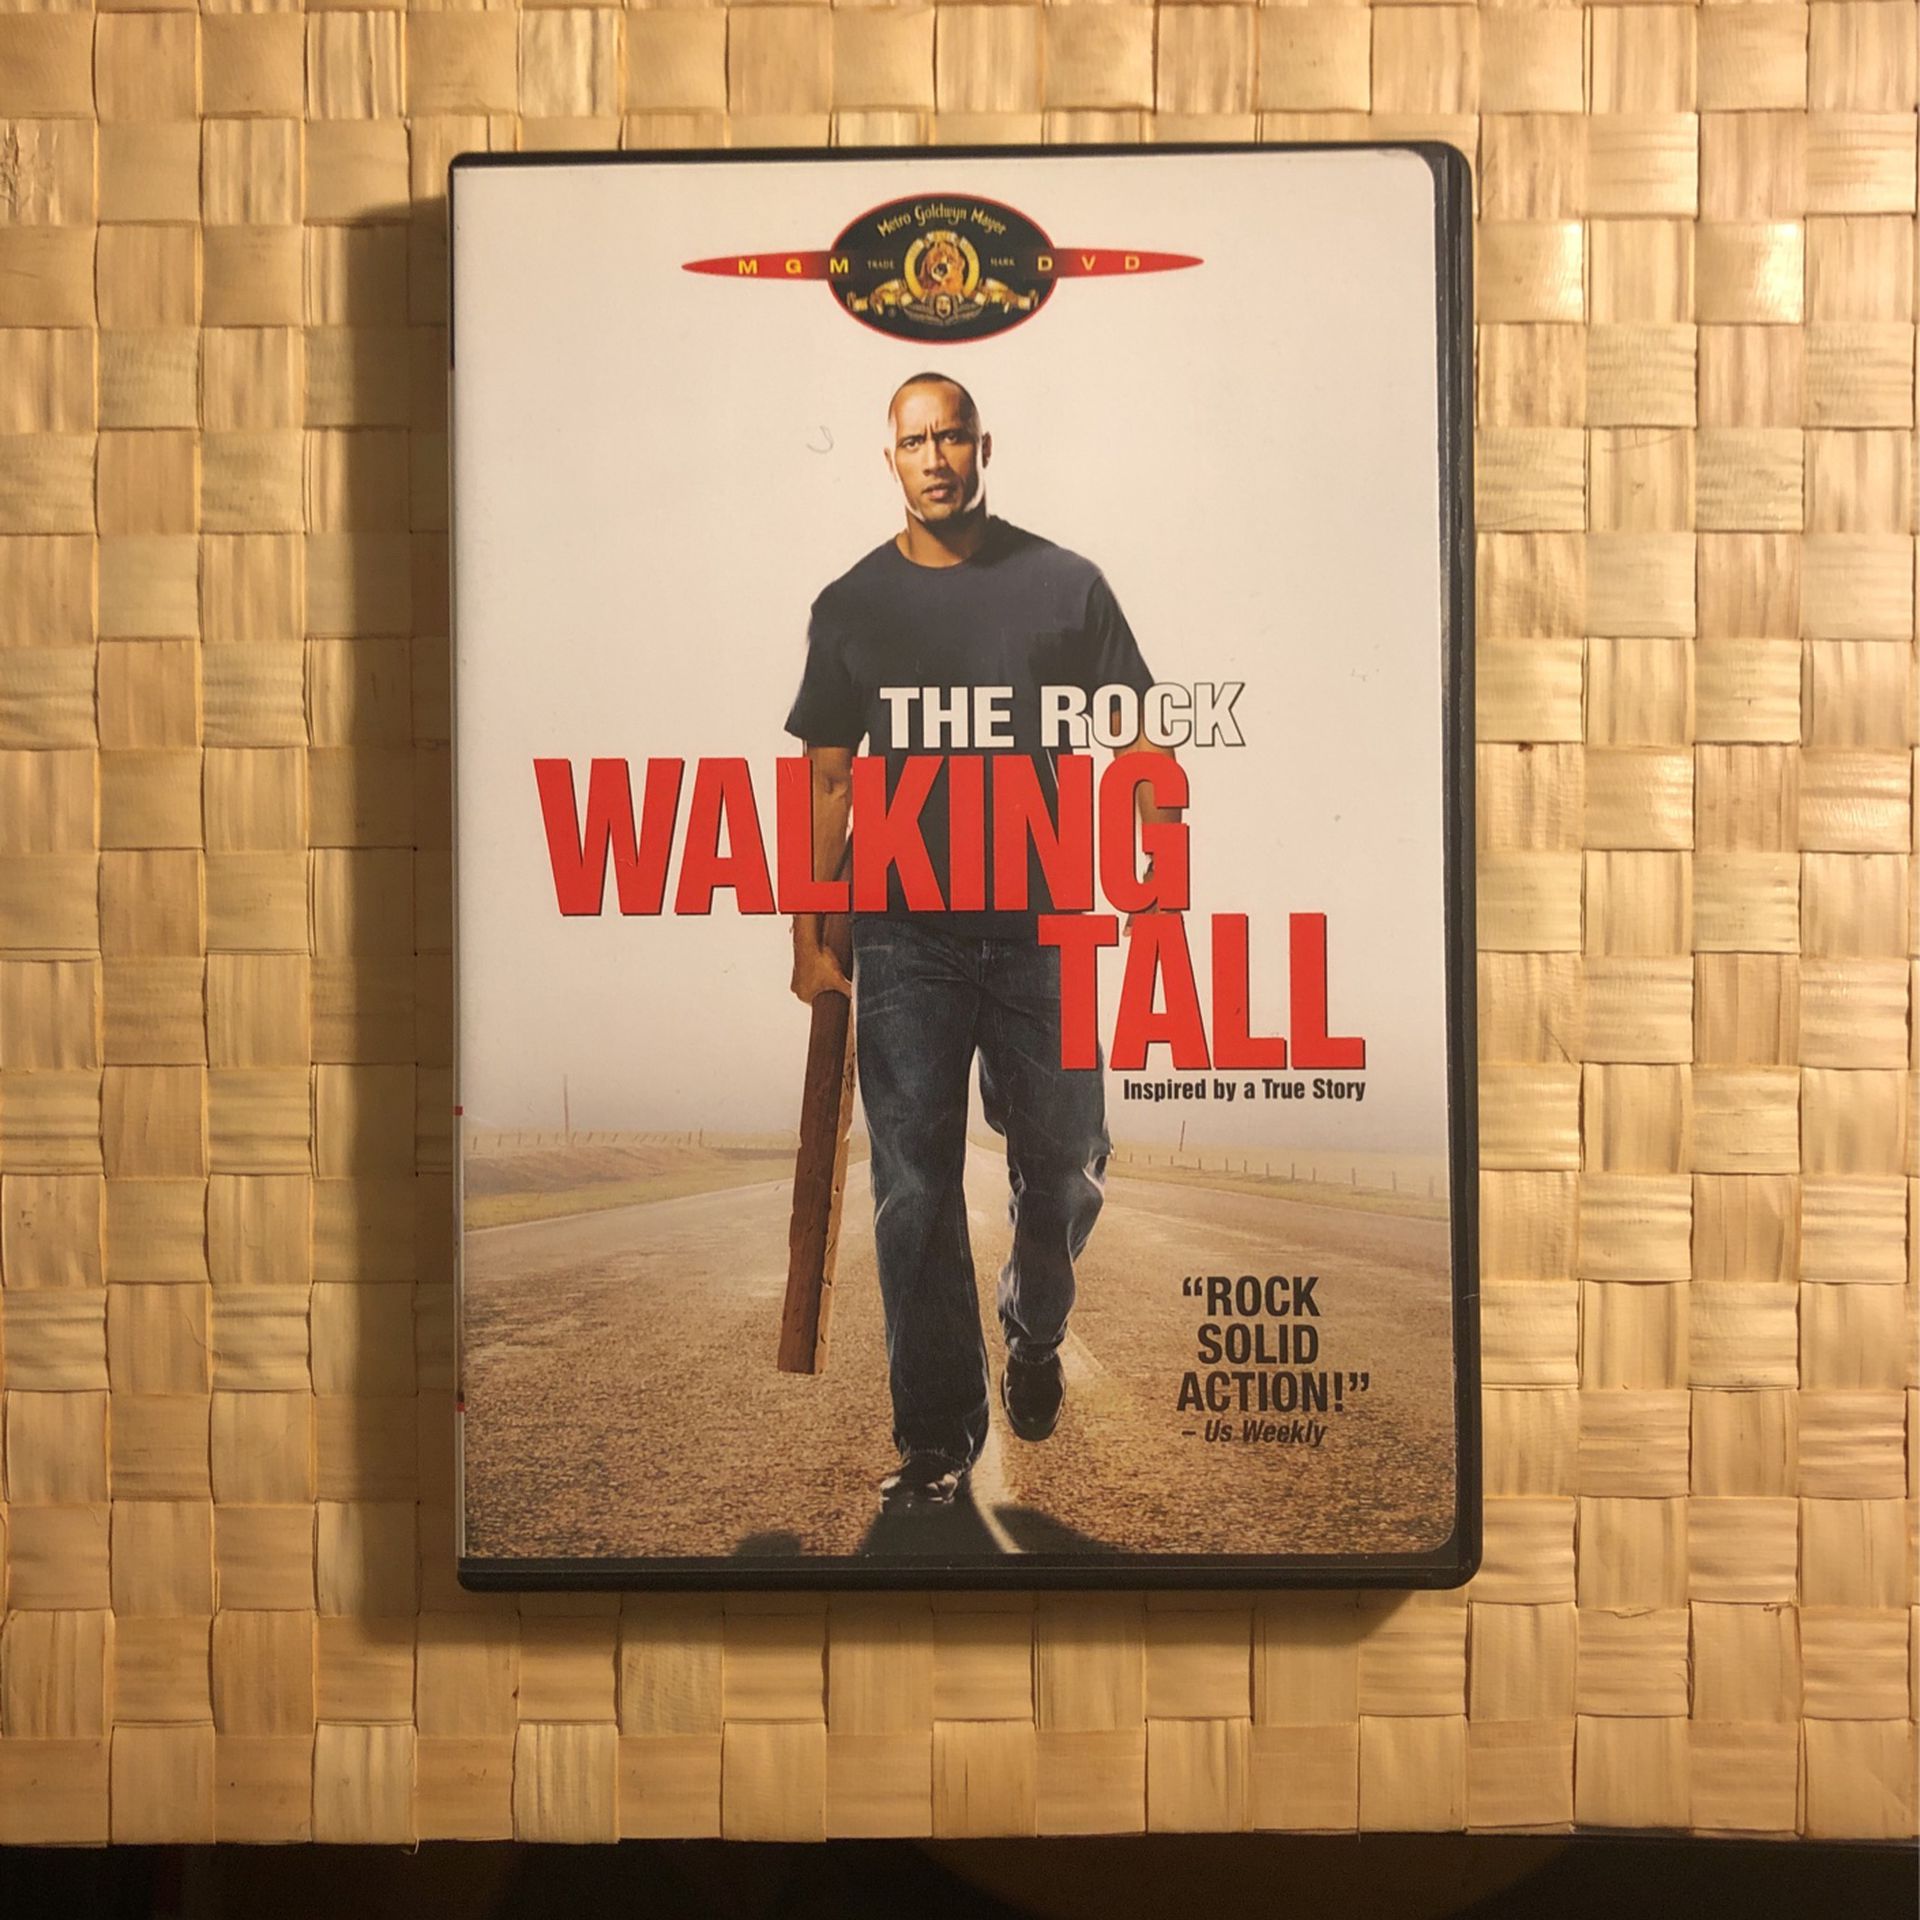 Walking tall. Featuring Dwayne the rock Johnson. Inspired by a true story